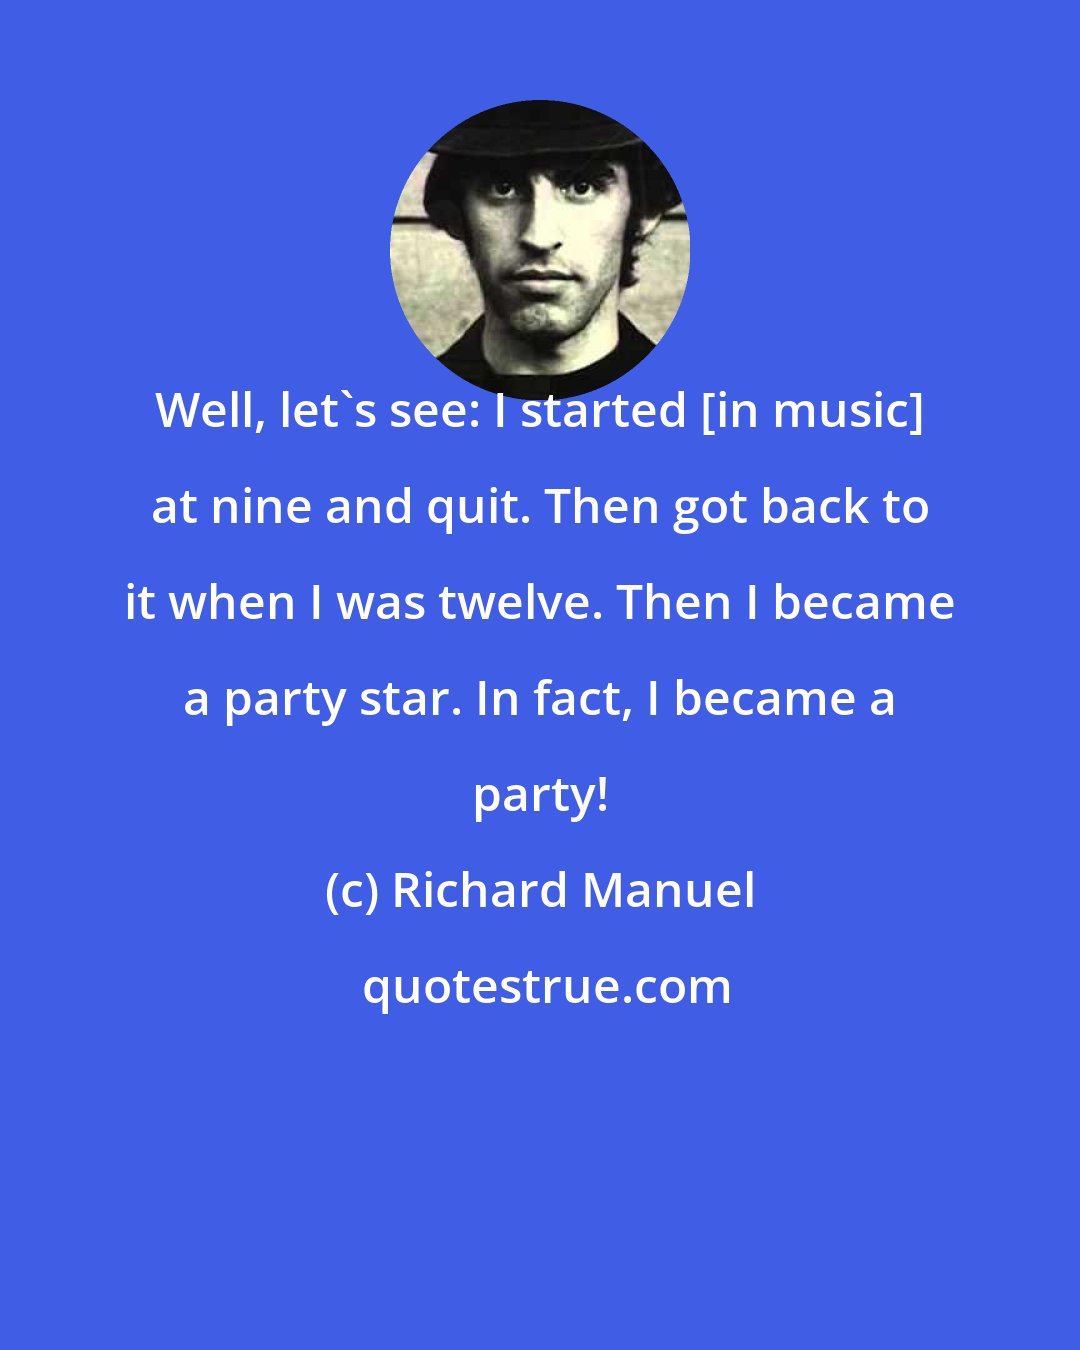 Richard Manuel: Well, let's see: I started [in music] at nine and quit. Then got back to it when I was twelve. Then I became a party star. In fact, I became a party!